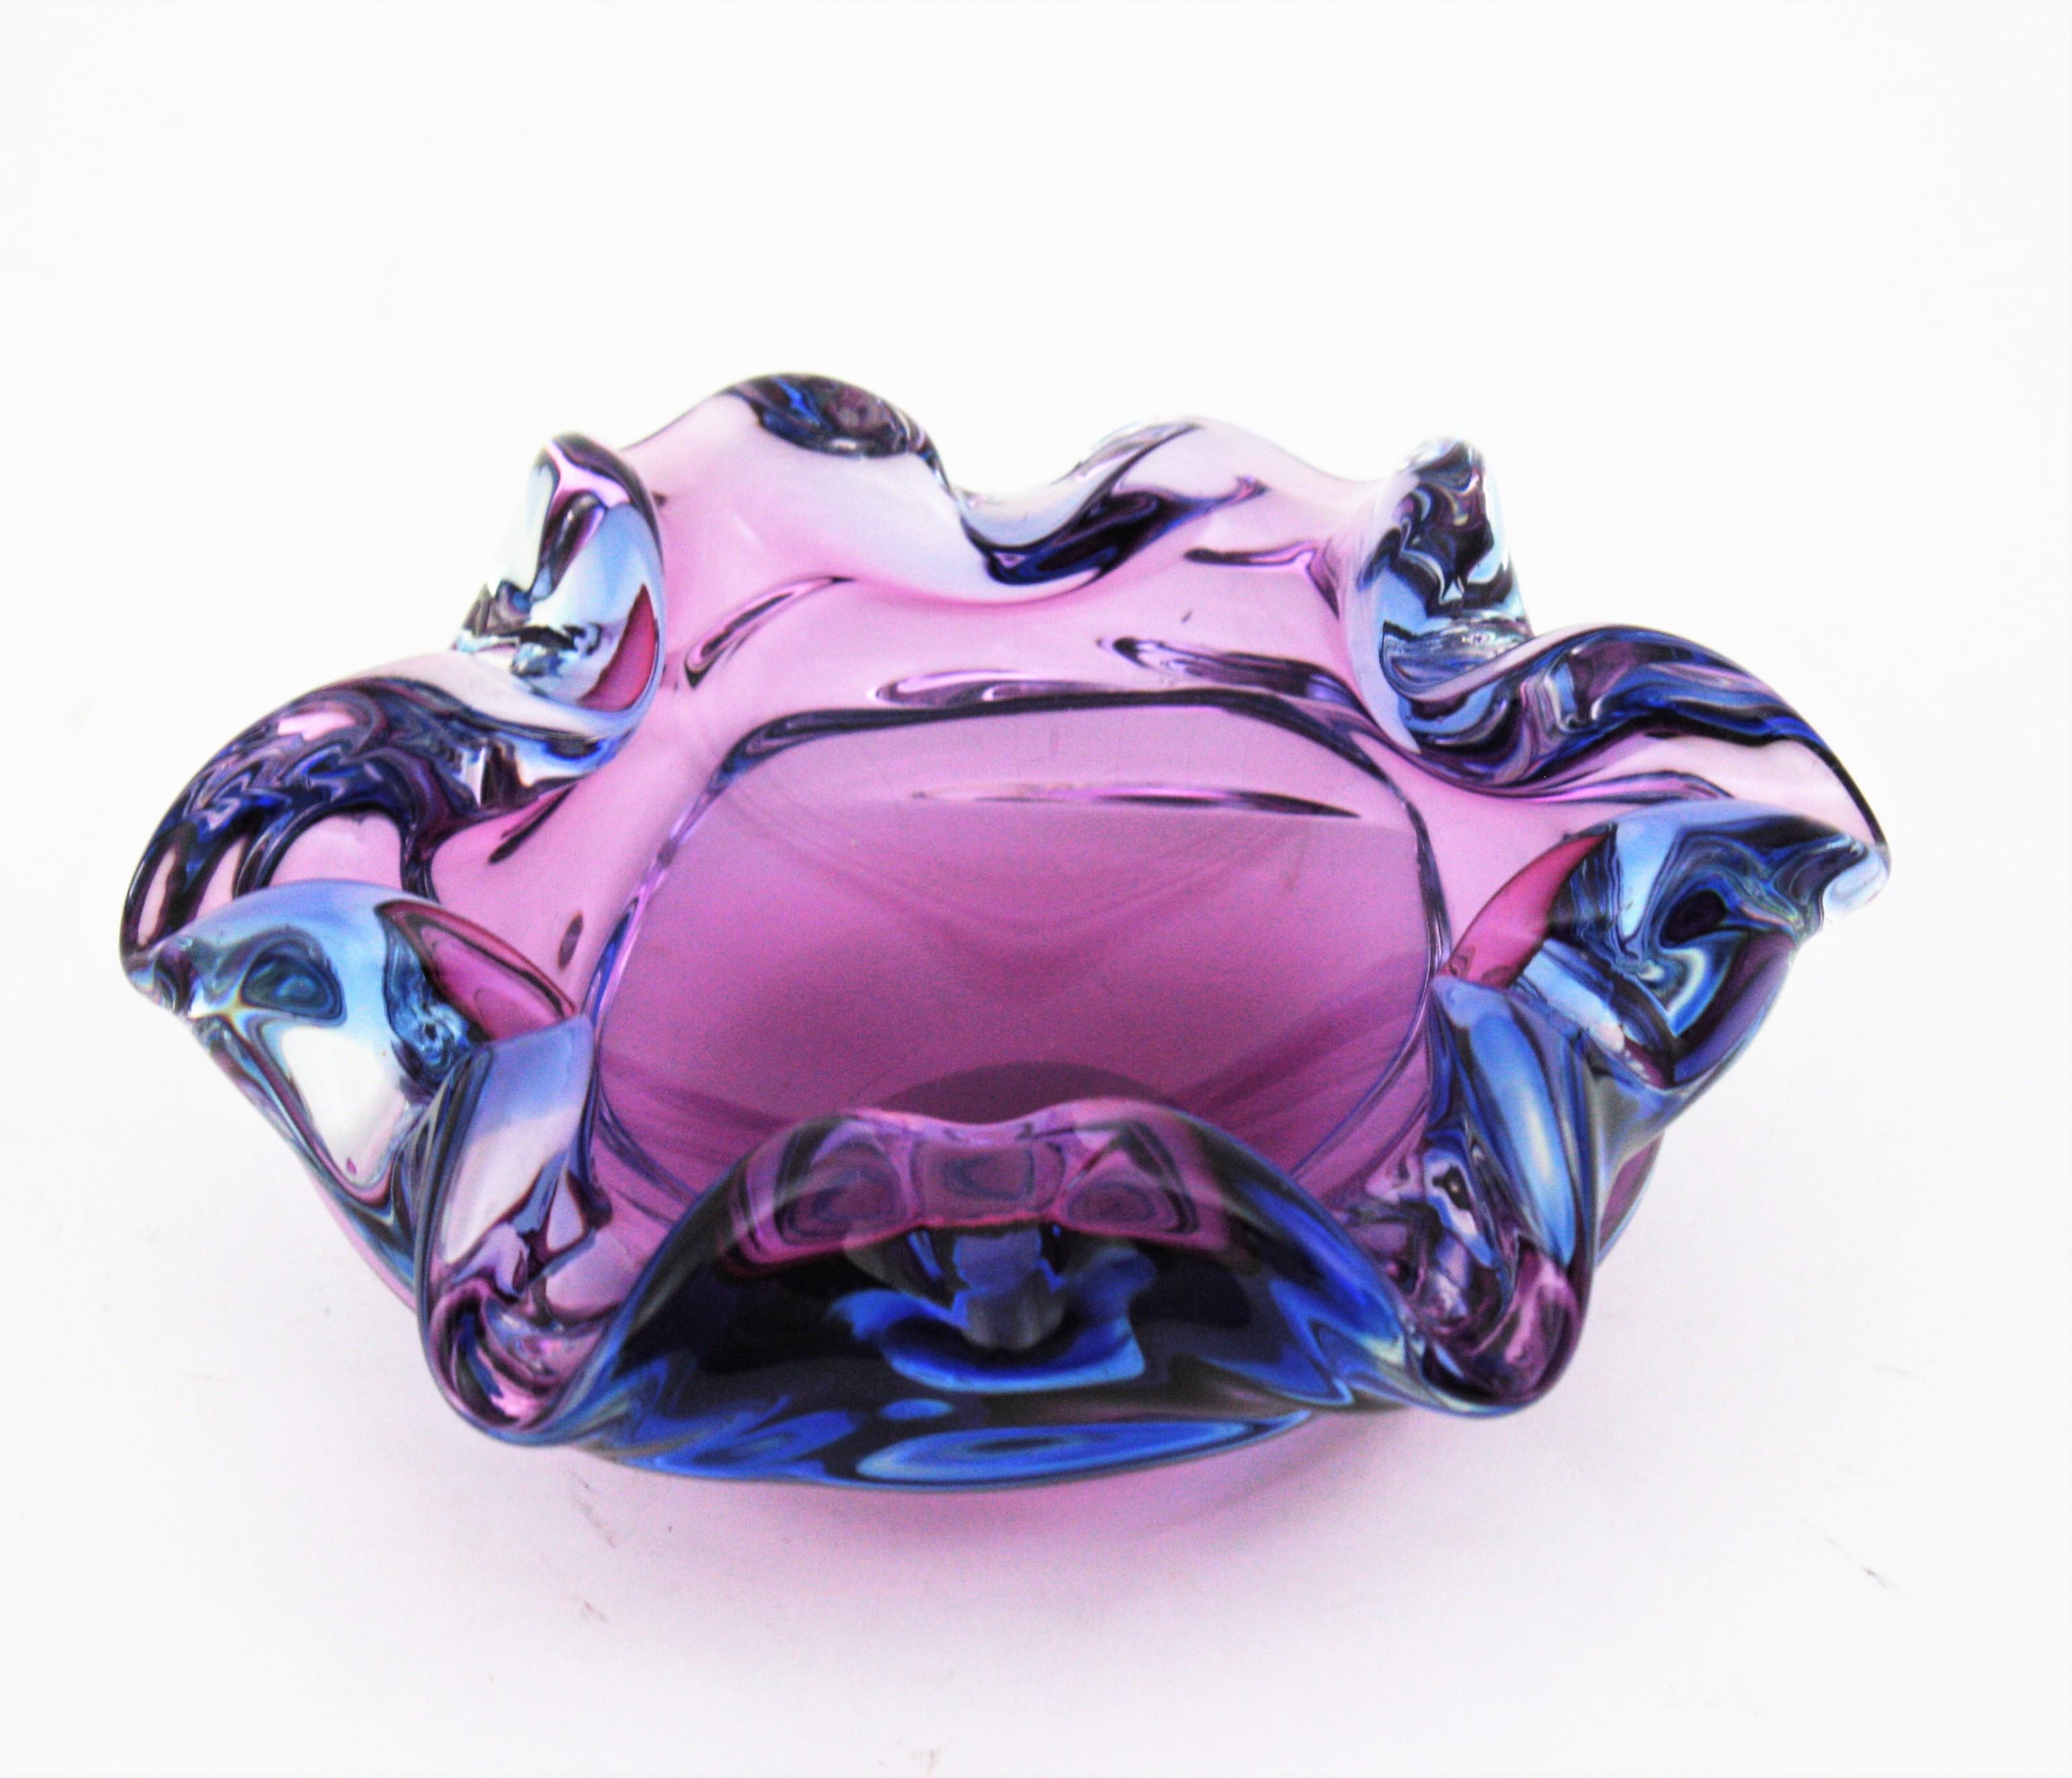 20th Century Seguso Murano Pink Purple Sommerso Art Glass Bowl or Ashtray, Italy, 1960s For Sale